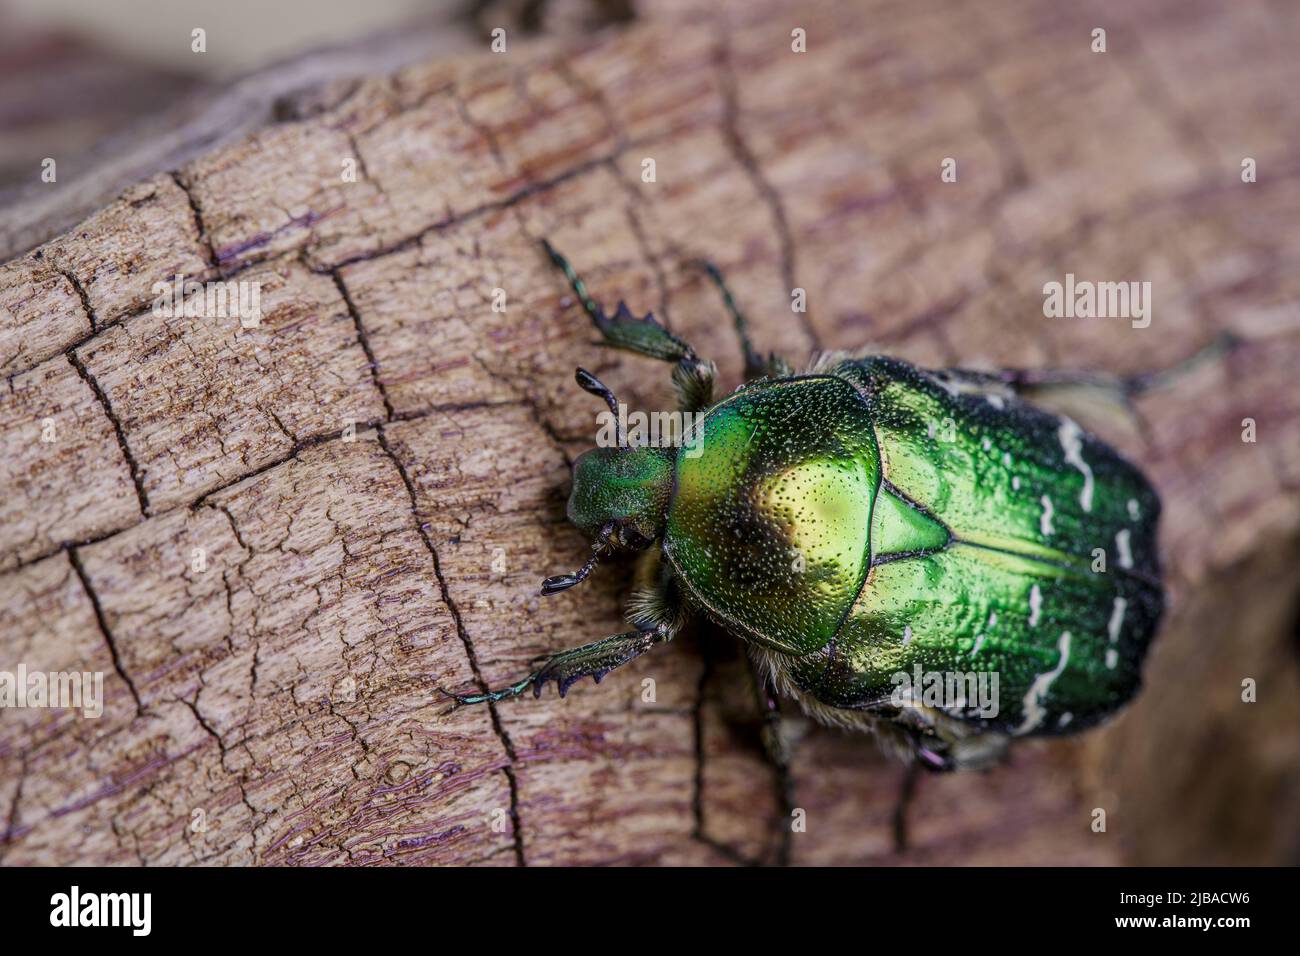 Close up of Bright shiny green Flower chafer Stock Photo